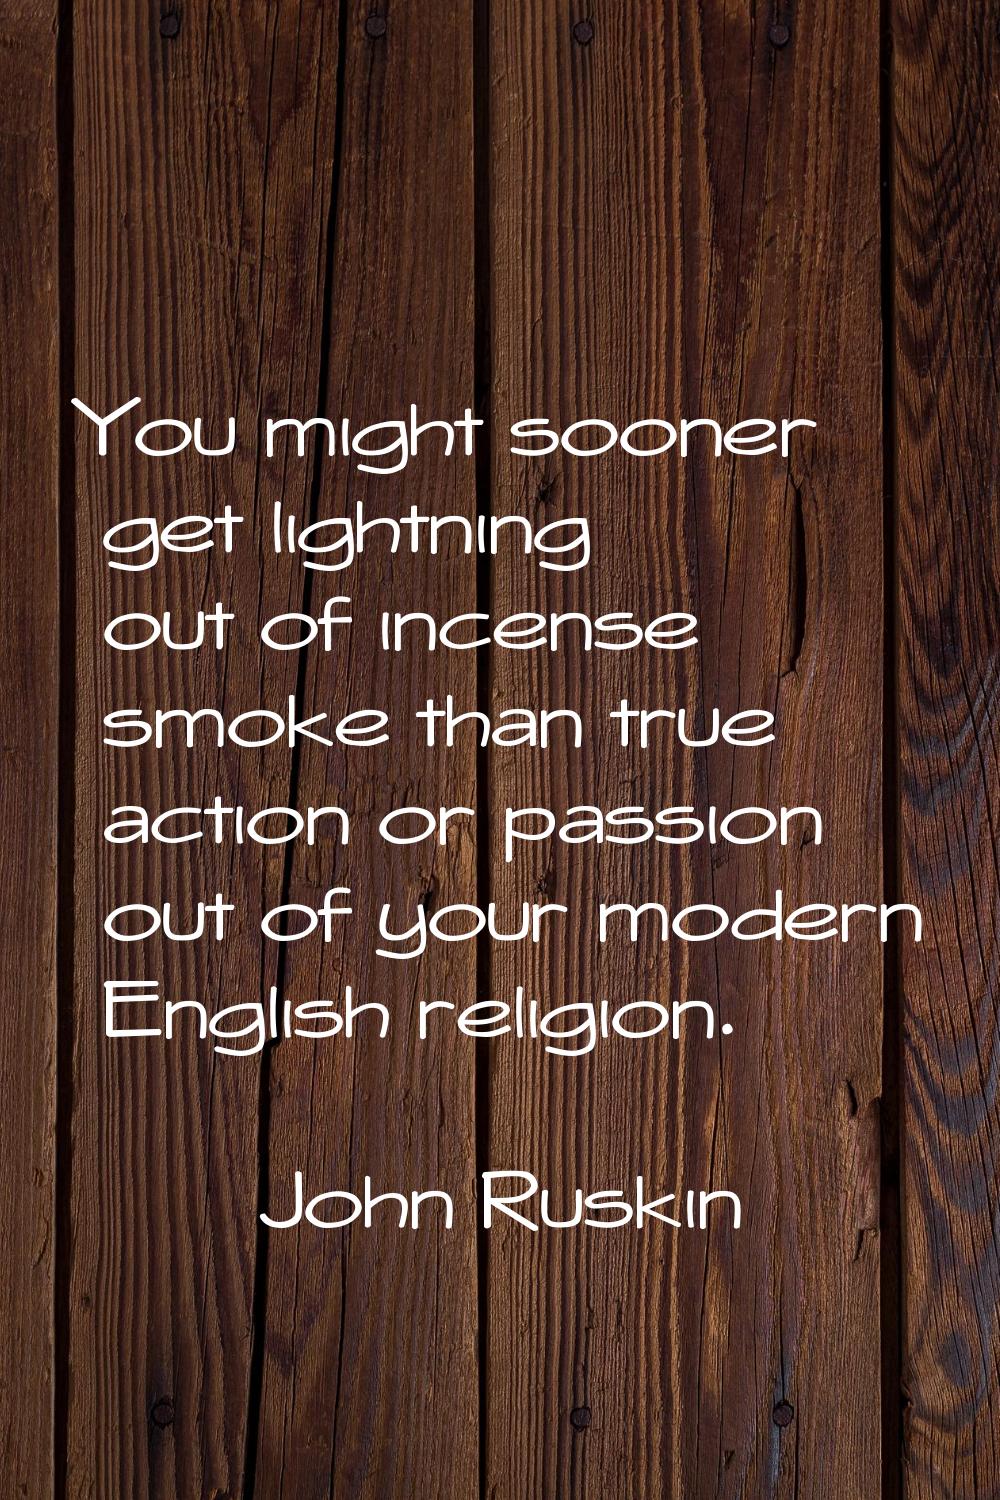 You might sooner get lightning out of incense smoke than true action or passion out of your modern 